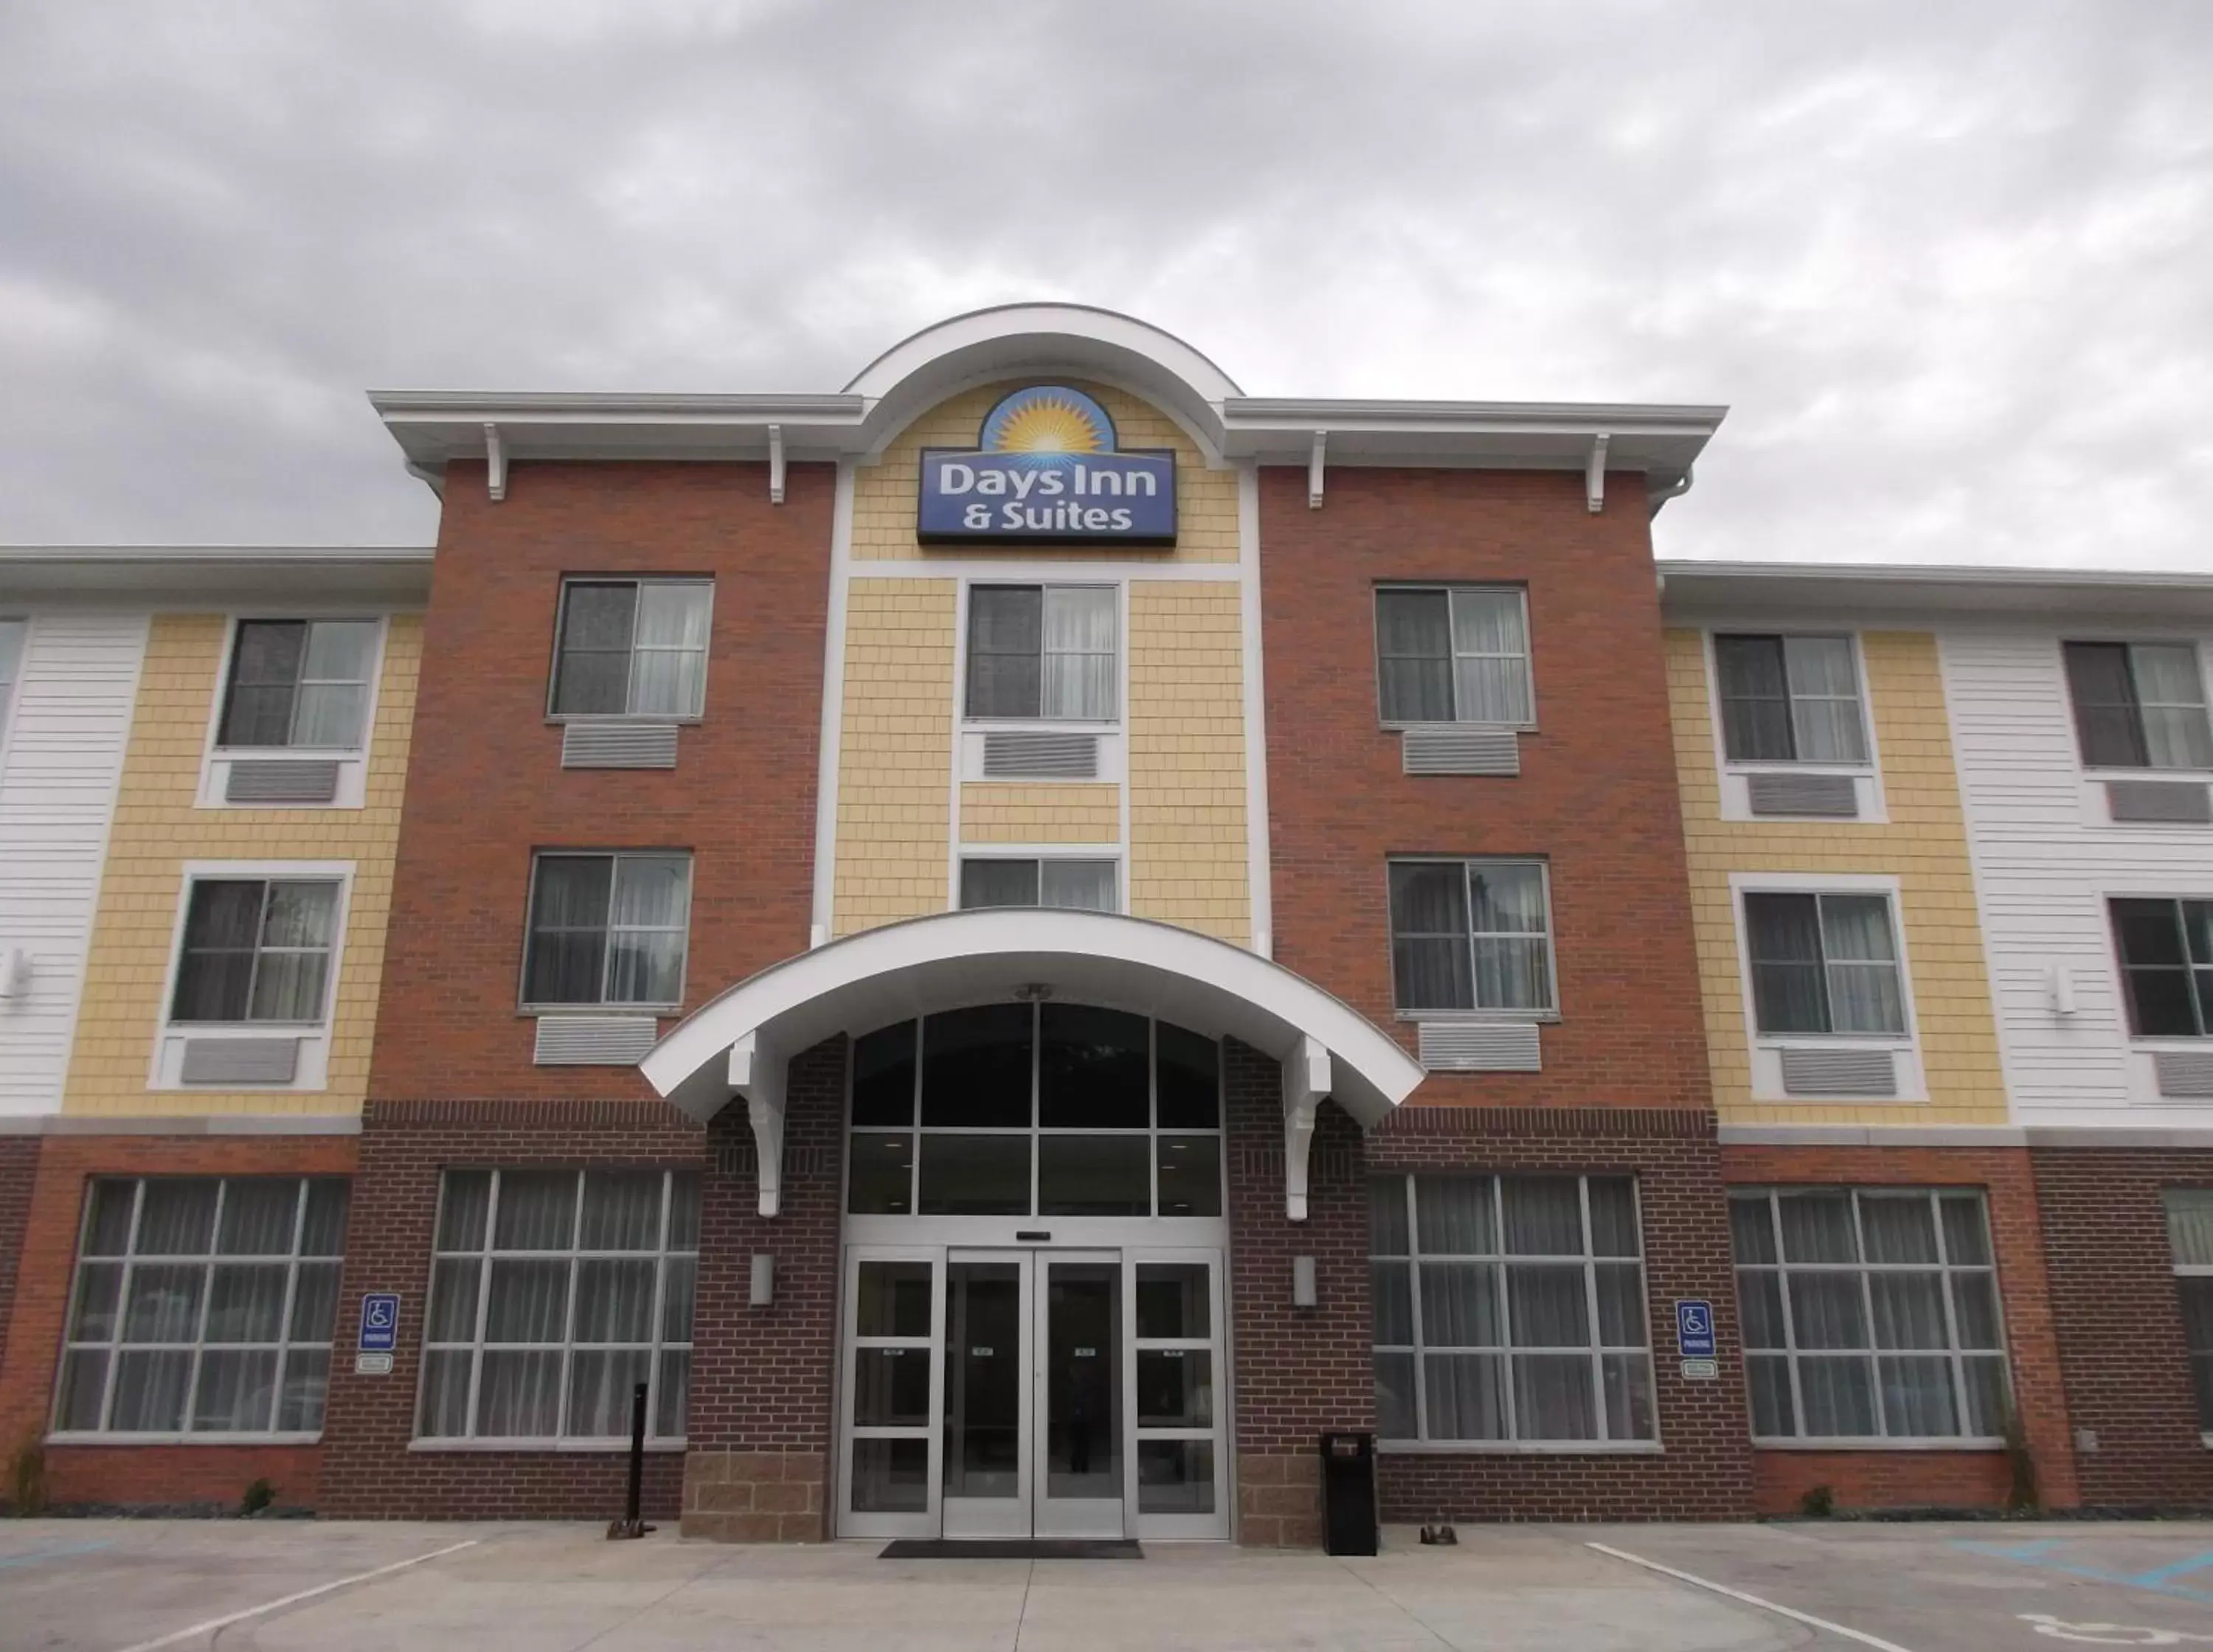 Facade/entrance, Property Building in Days Inn & Suites by Wyndham Caldwell